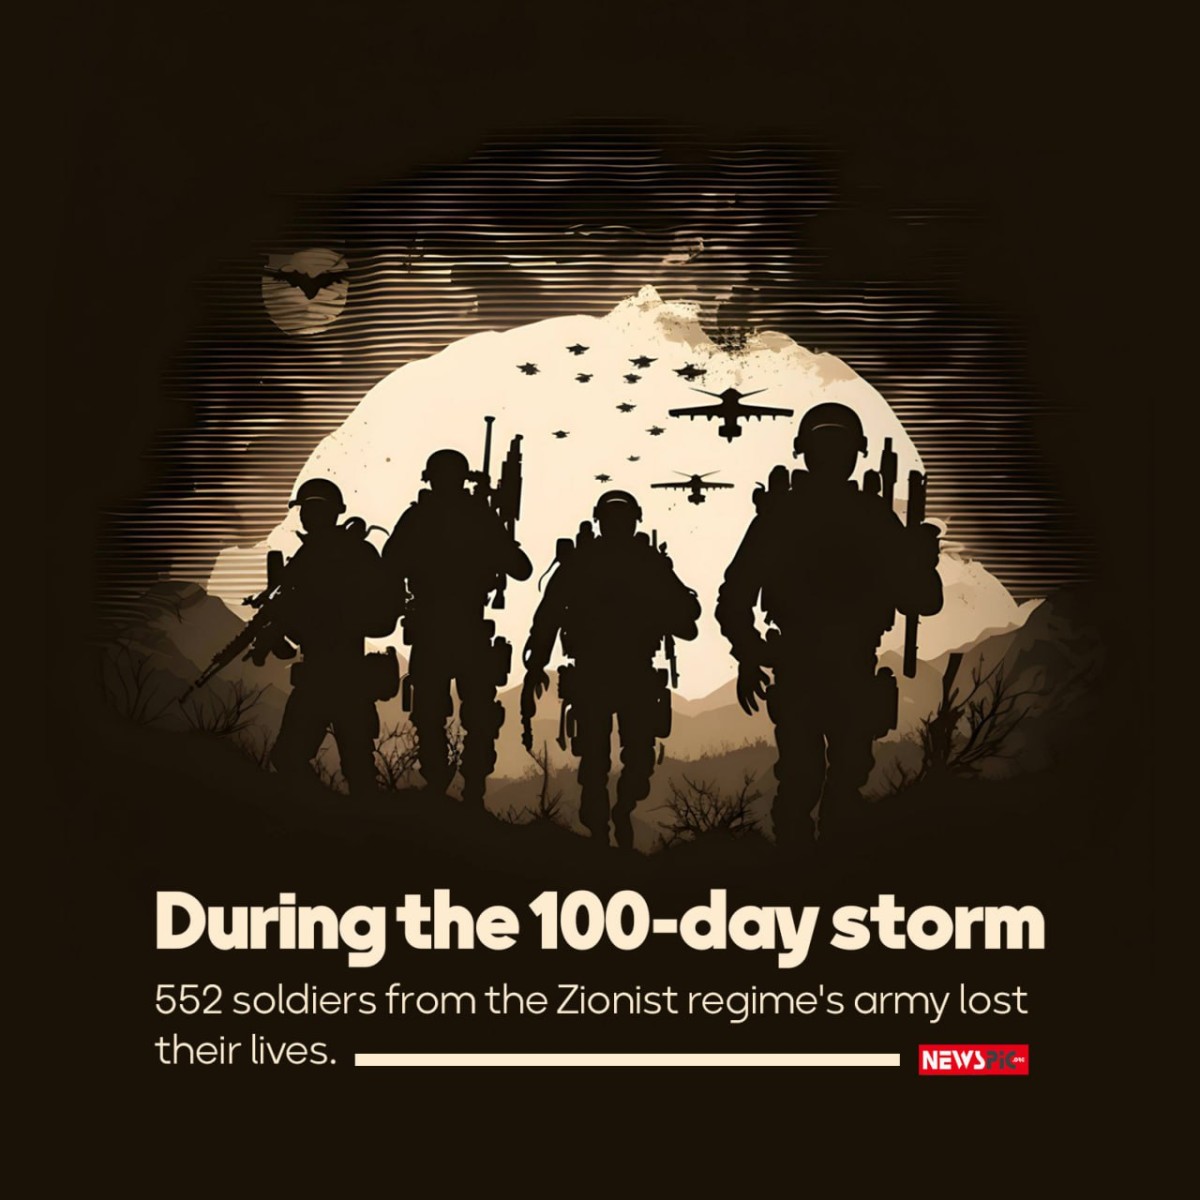 During the 100-day storm 552 soldiers from the Zionist regime's army lost their lives